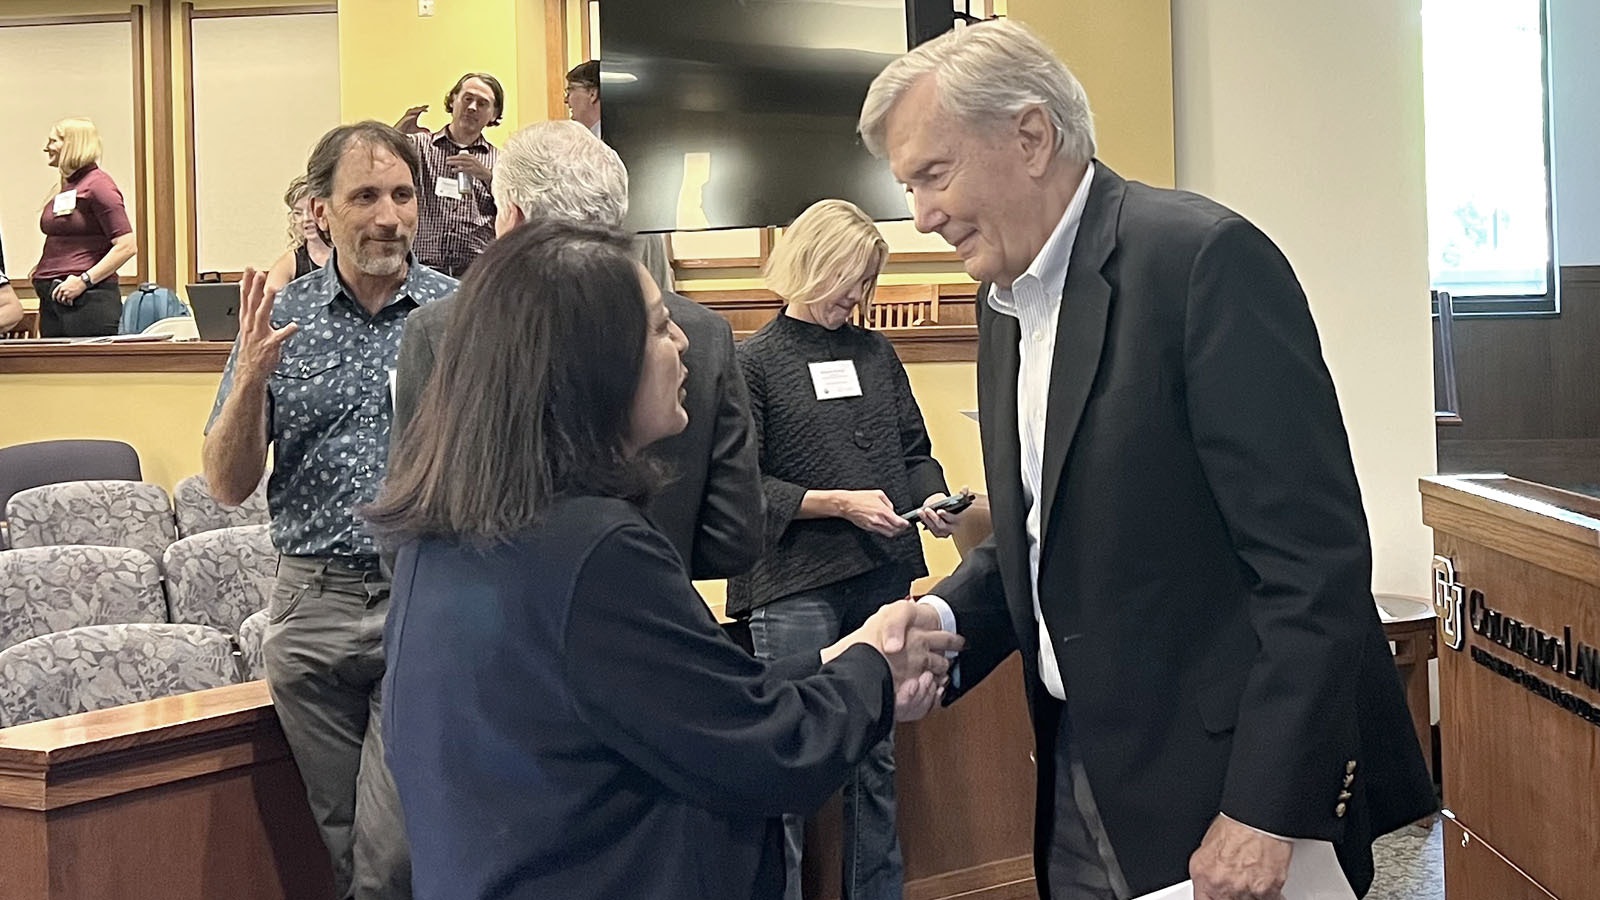 Former U.S. Interior Secretary and Arizona Governor Bruce Babbitt meets with Nora McDowell, a representative of the Fort Mojave Indian Tribe on Friday during the “Crisis on the Colorado River” conference in Boulder, Colorado.